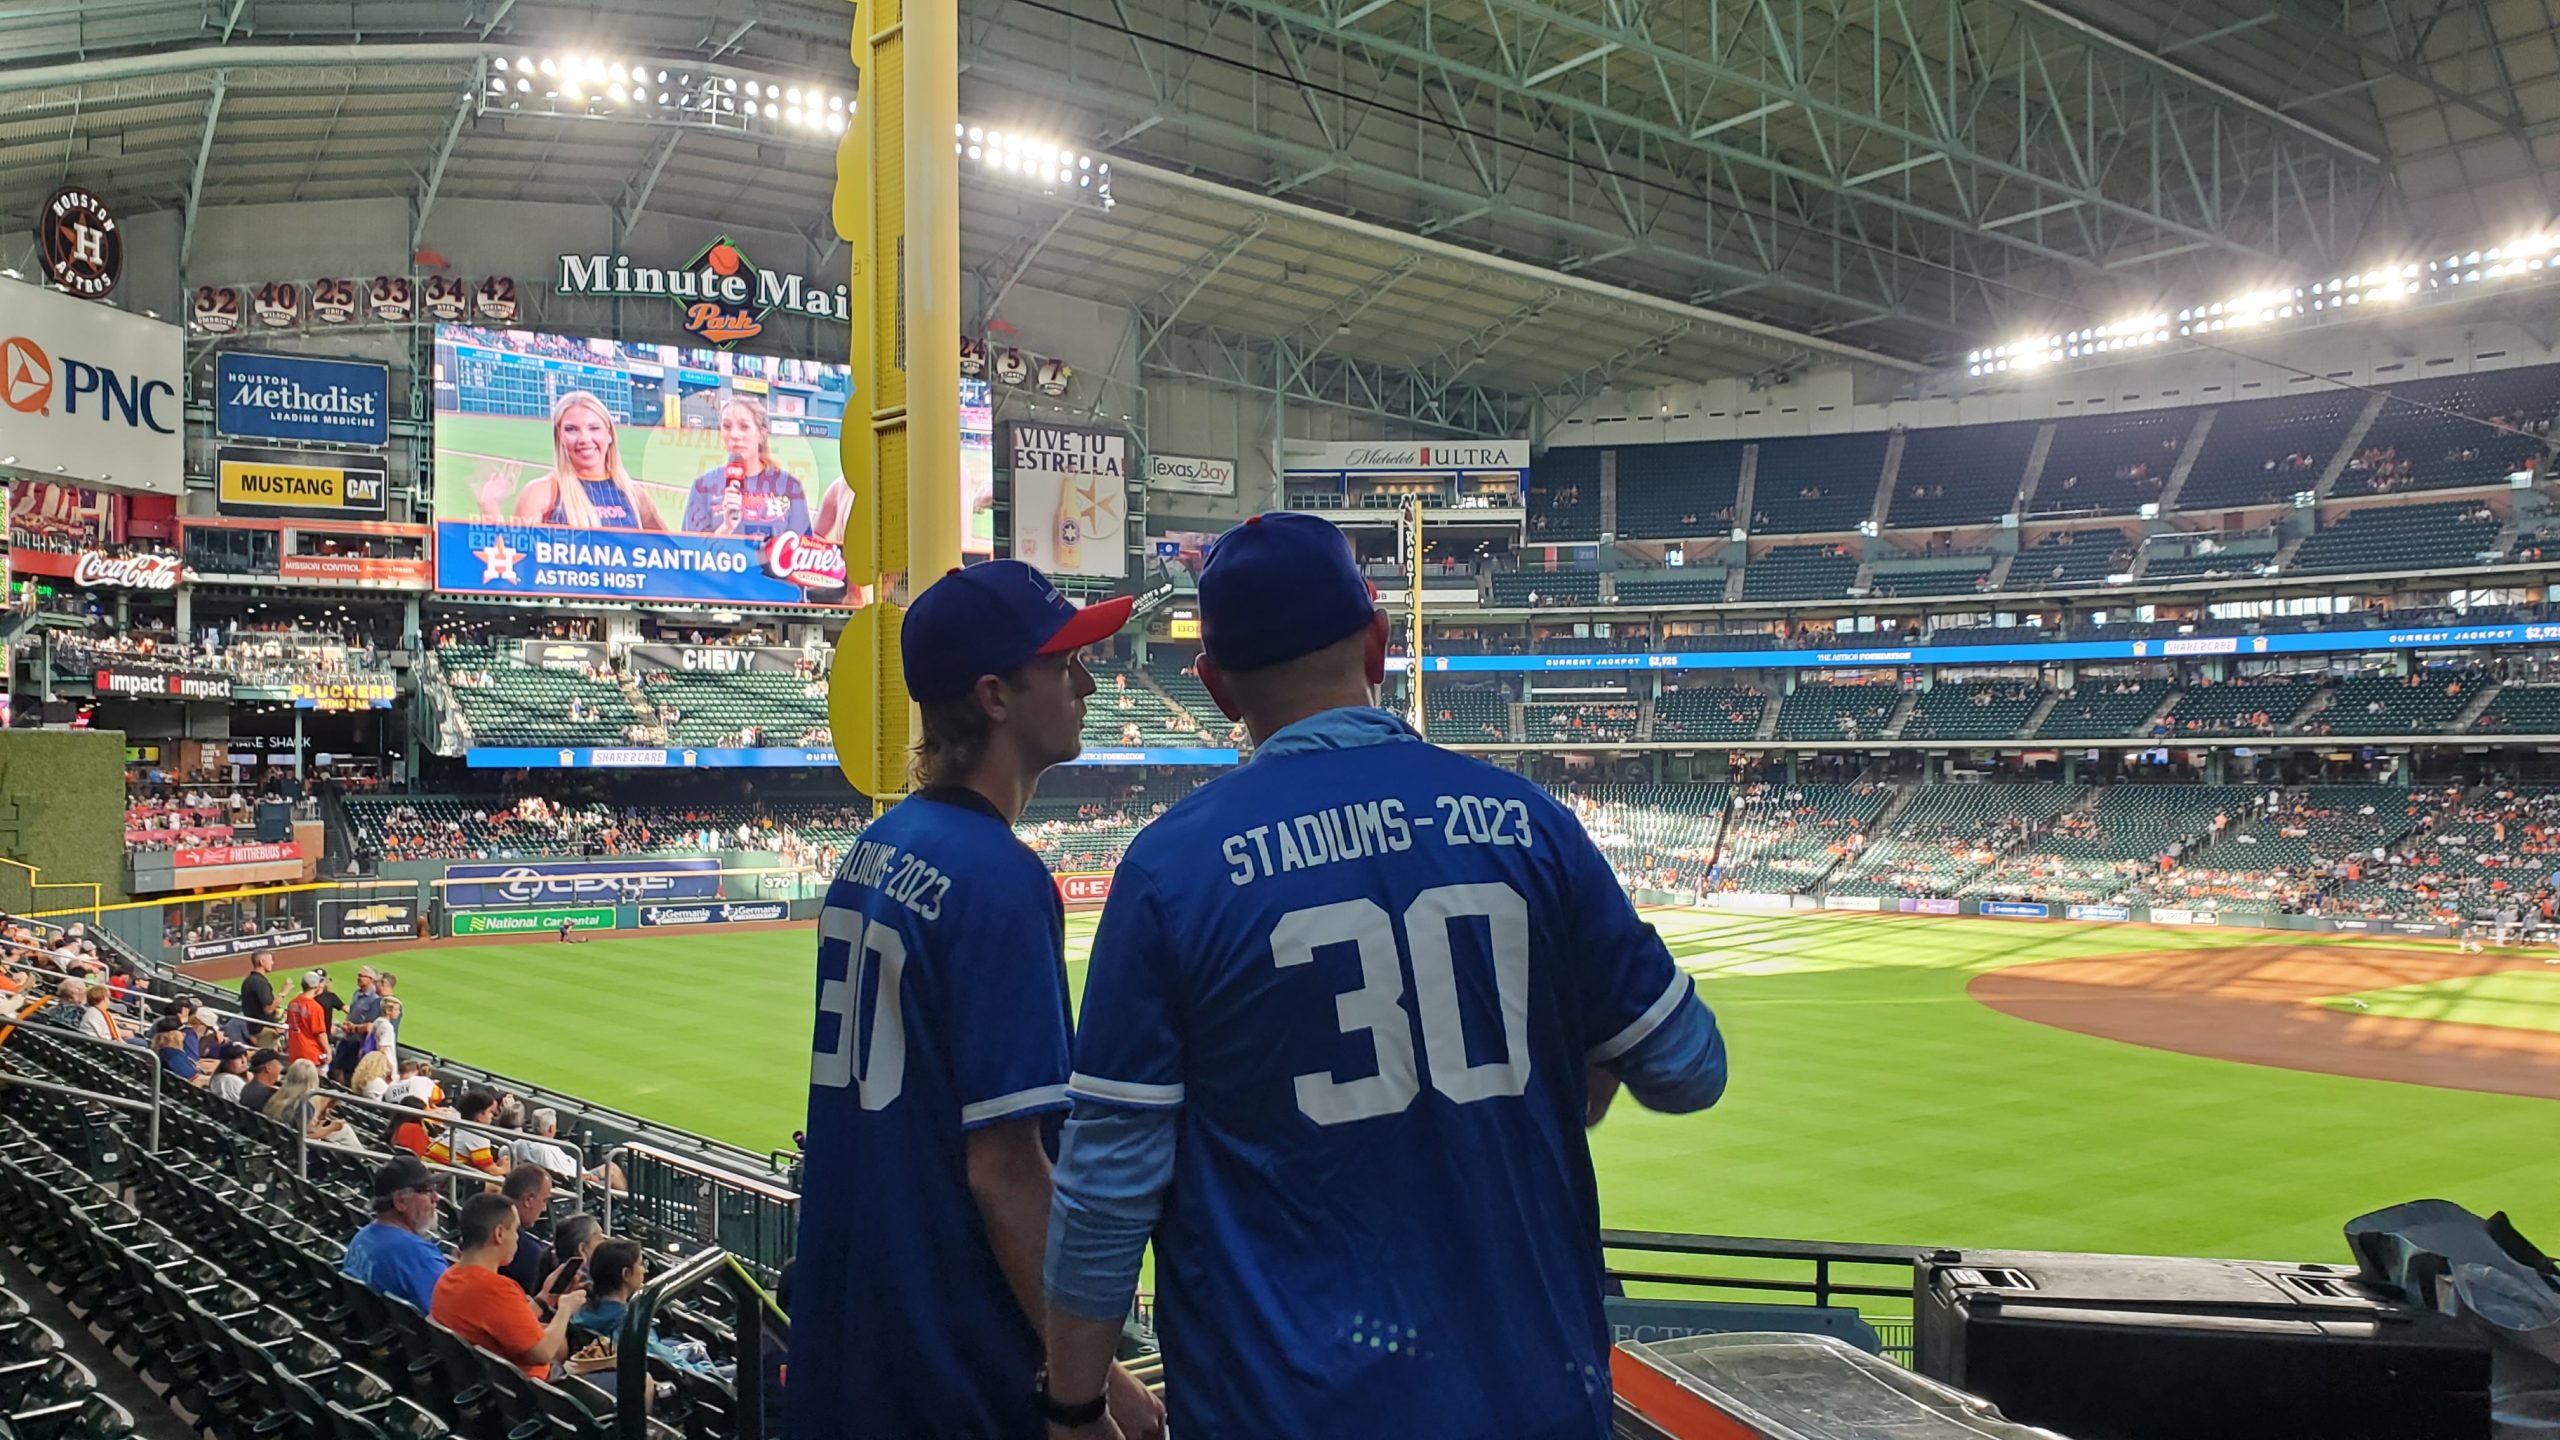 Ryan and Brad looking out at Minute Maid Park from the concourse.